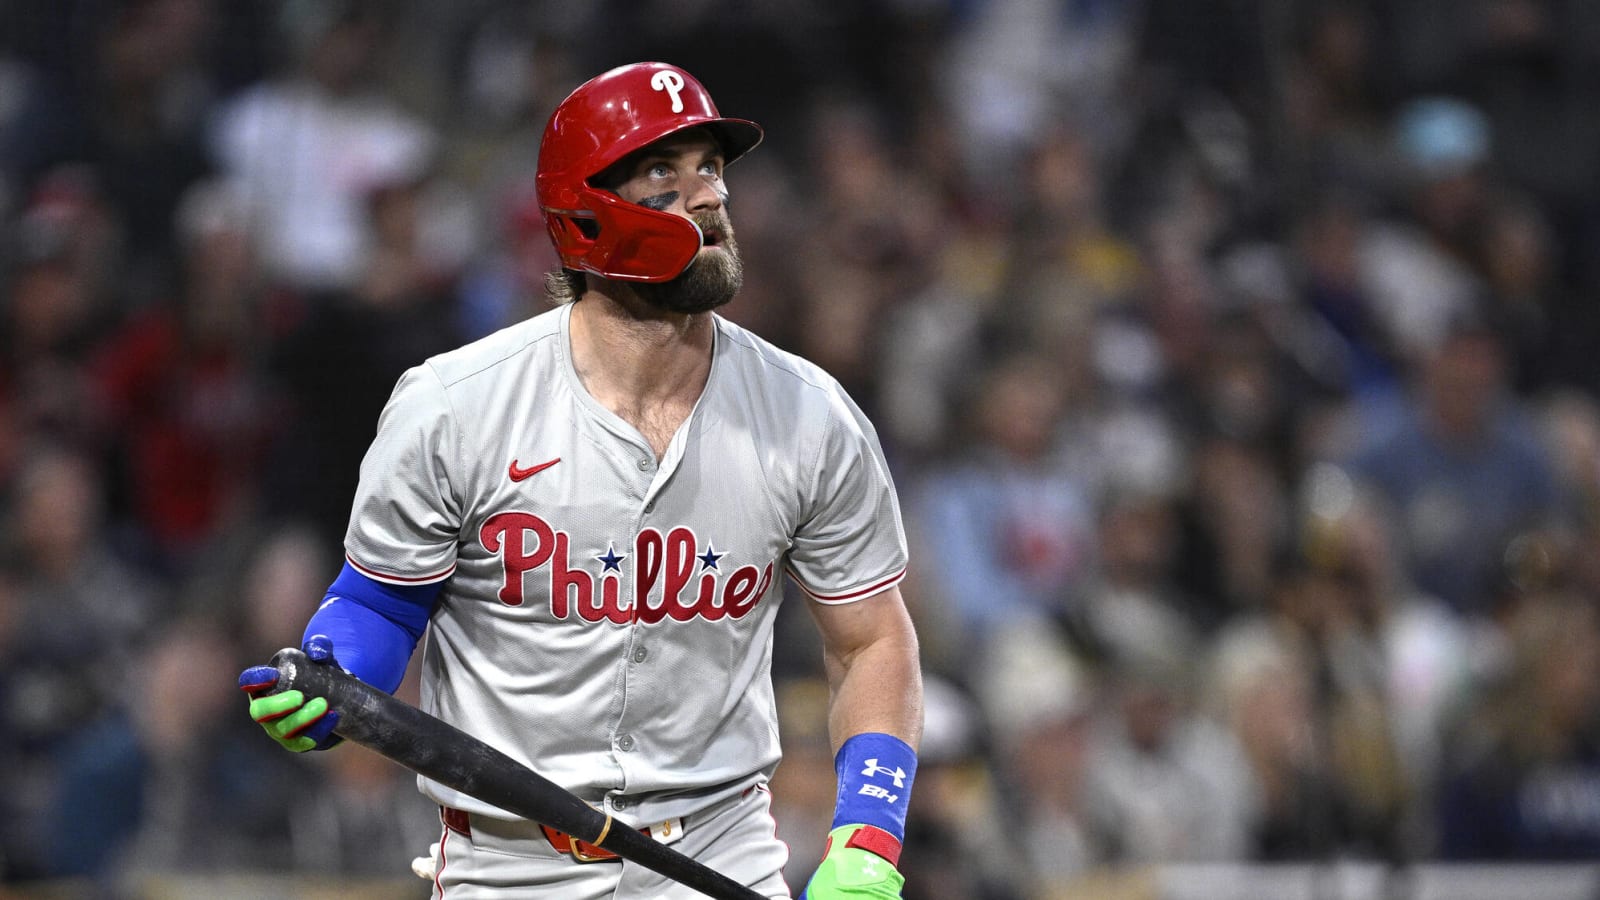 Bryce Harper and the Phillies are hot, Acuna and the Braves are not